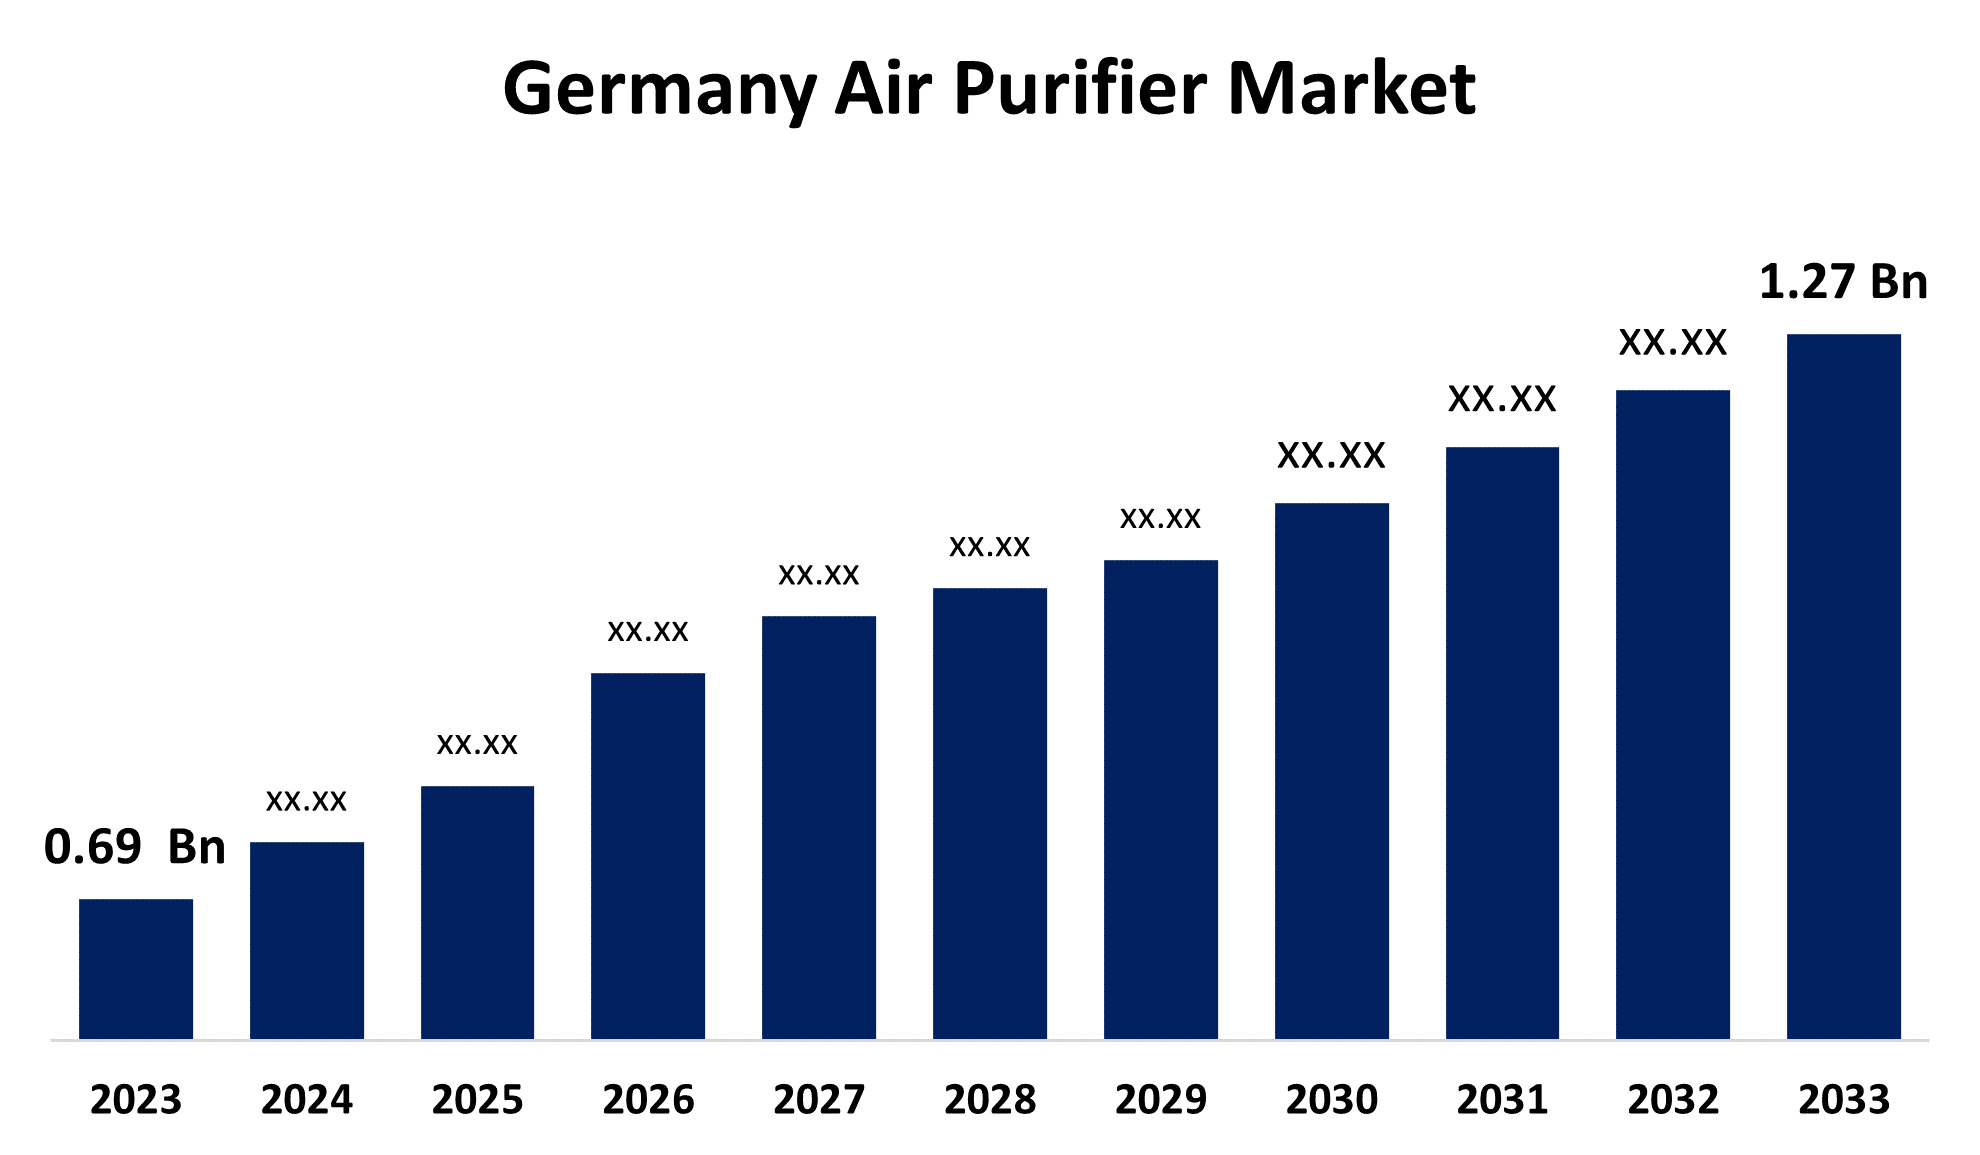 Germany Air Purifier Market